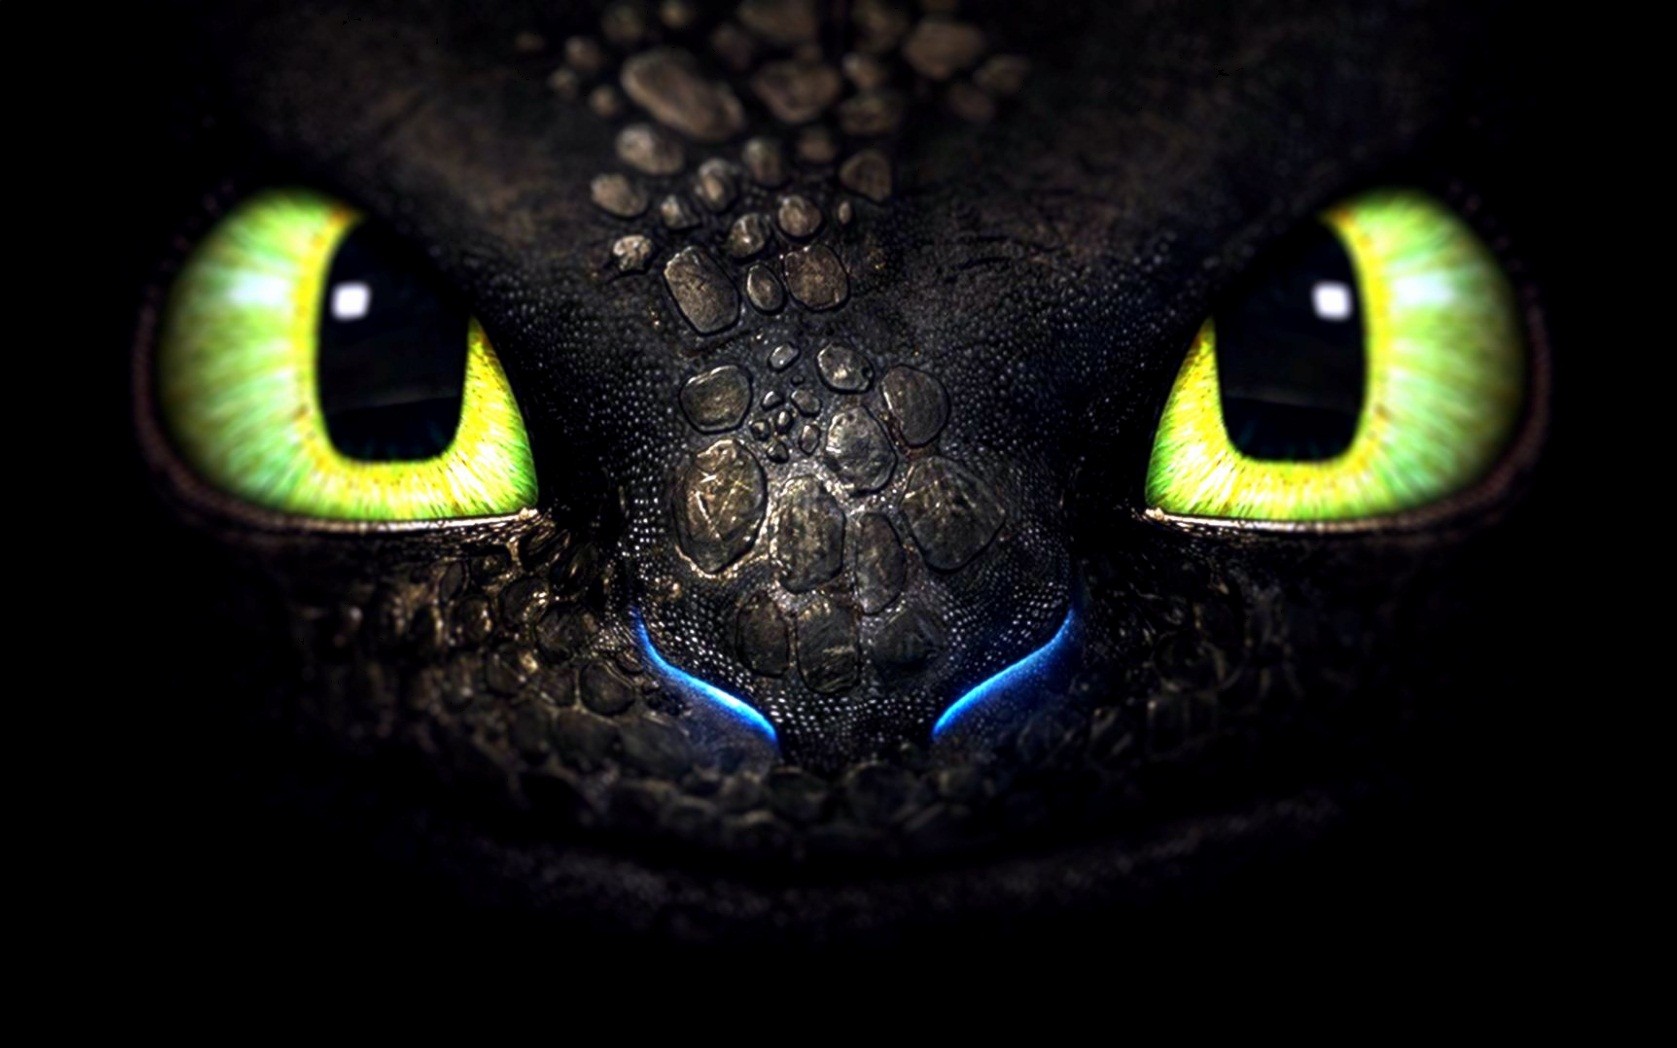 How To Train Your Dragon, Toothless, Dragon Wallpaper